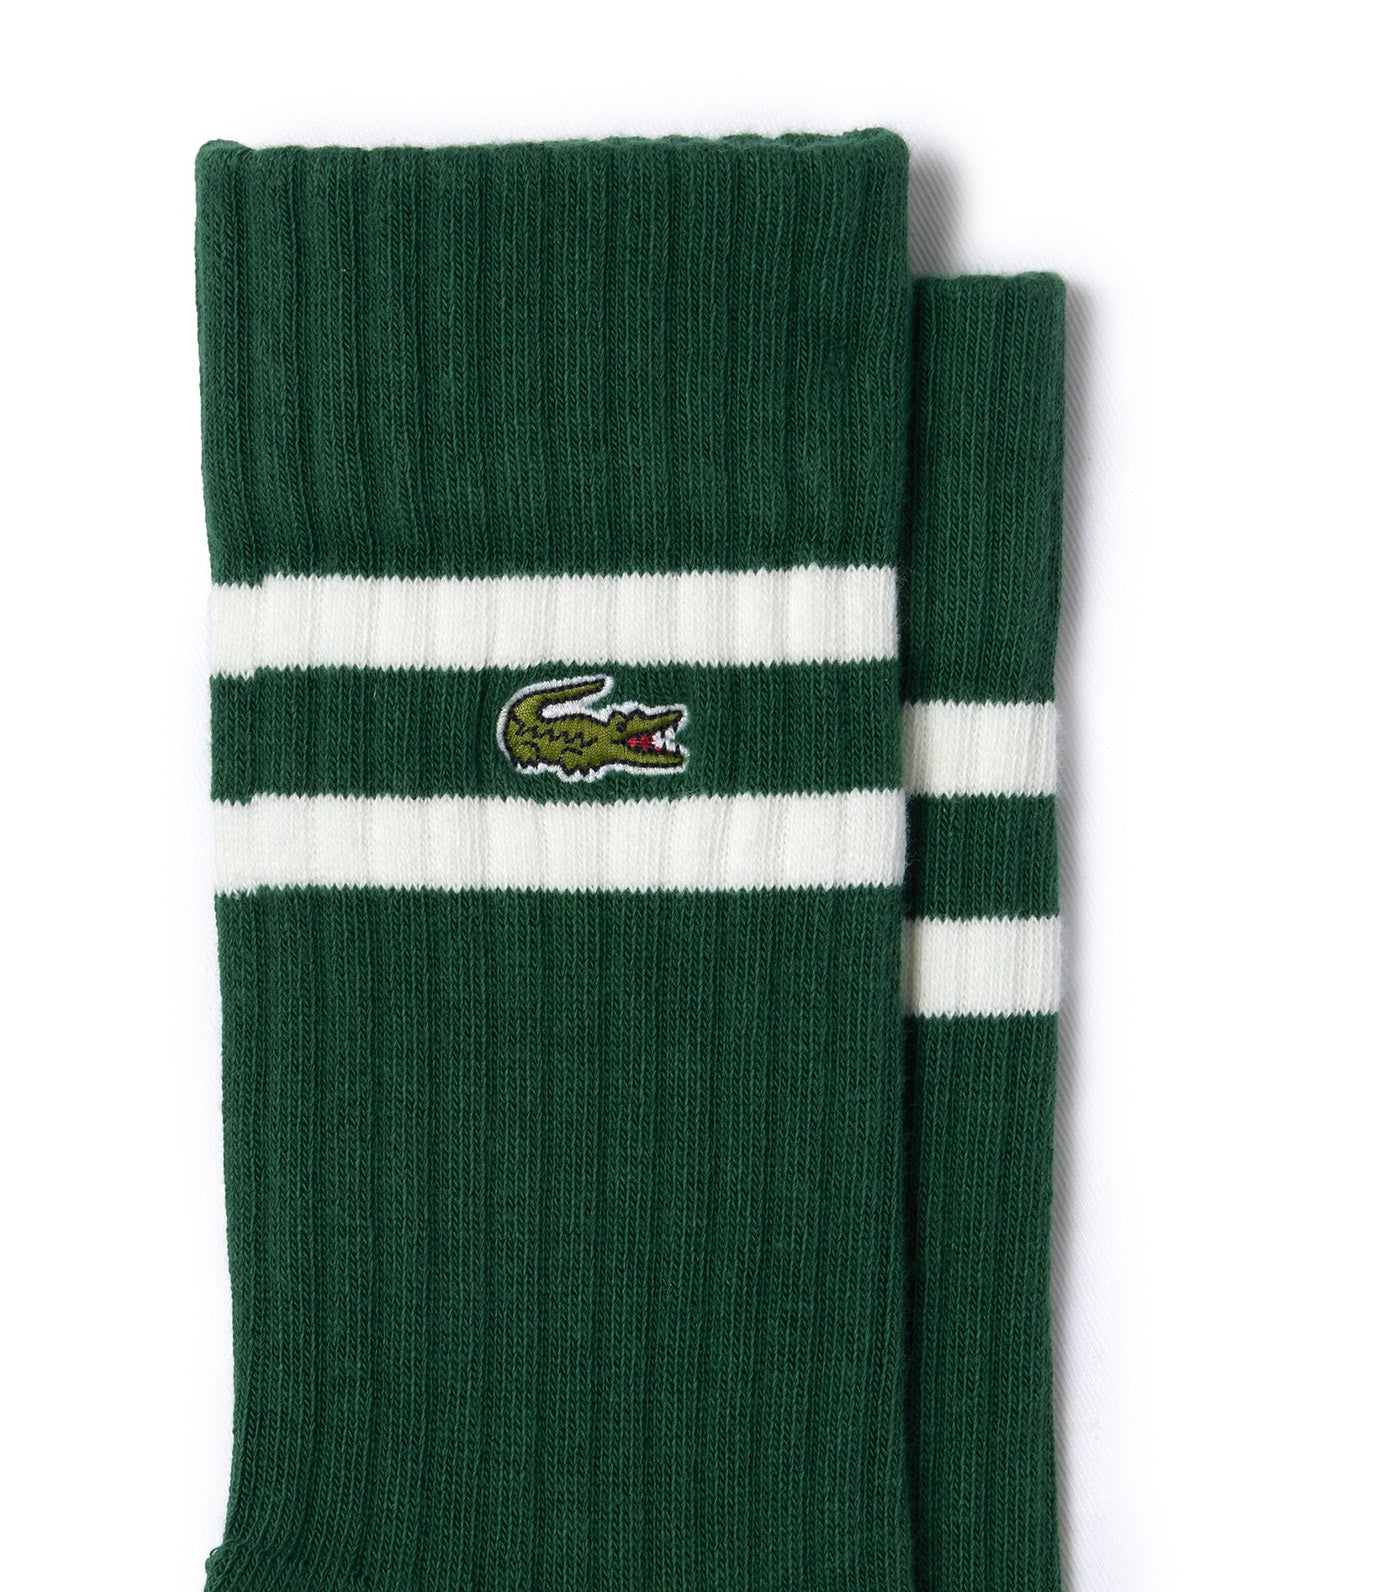 Unisex Ribbed Knit Socks With Contrast Stripes Green/Flour